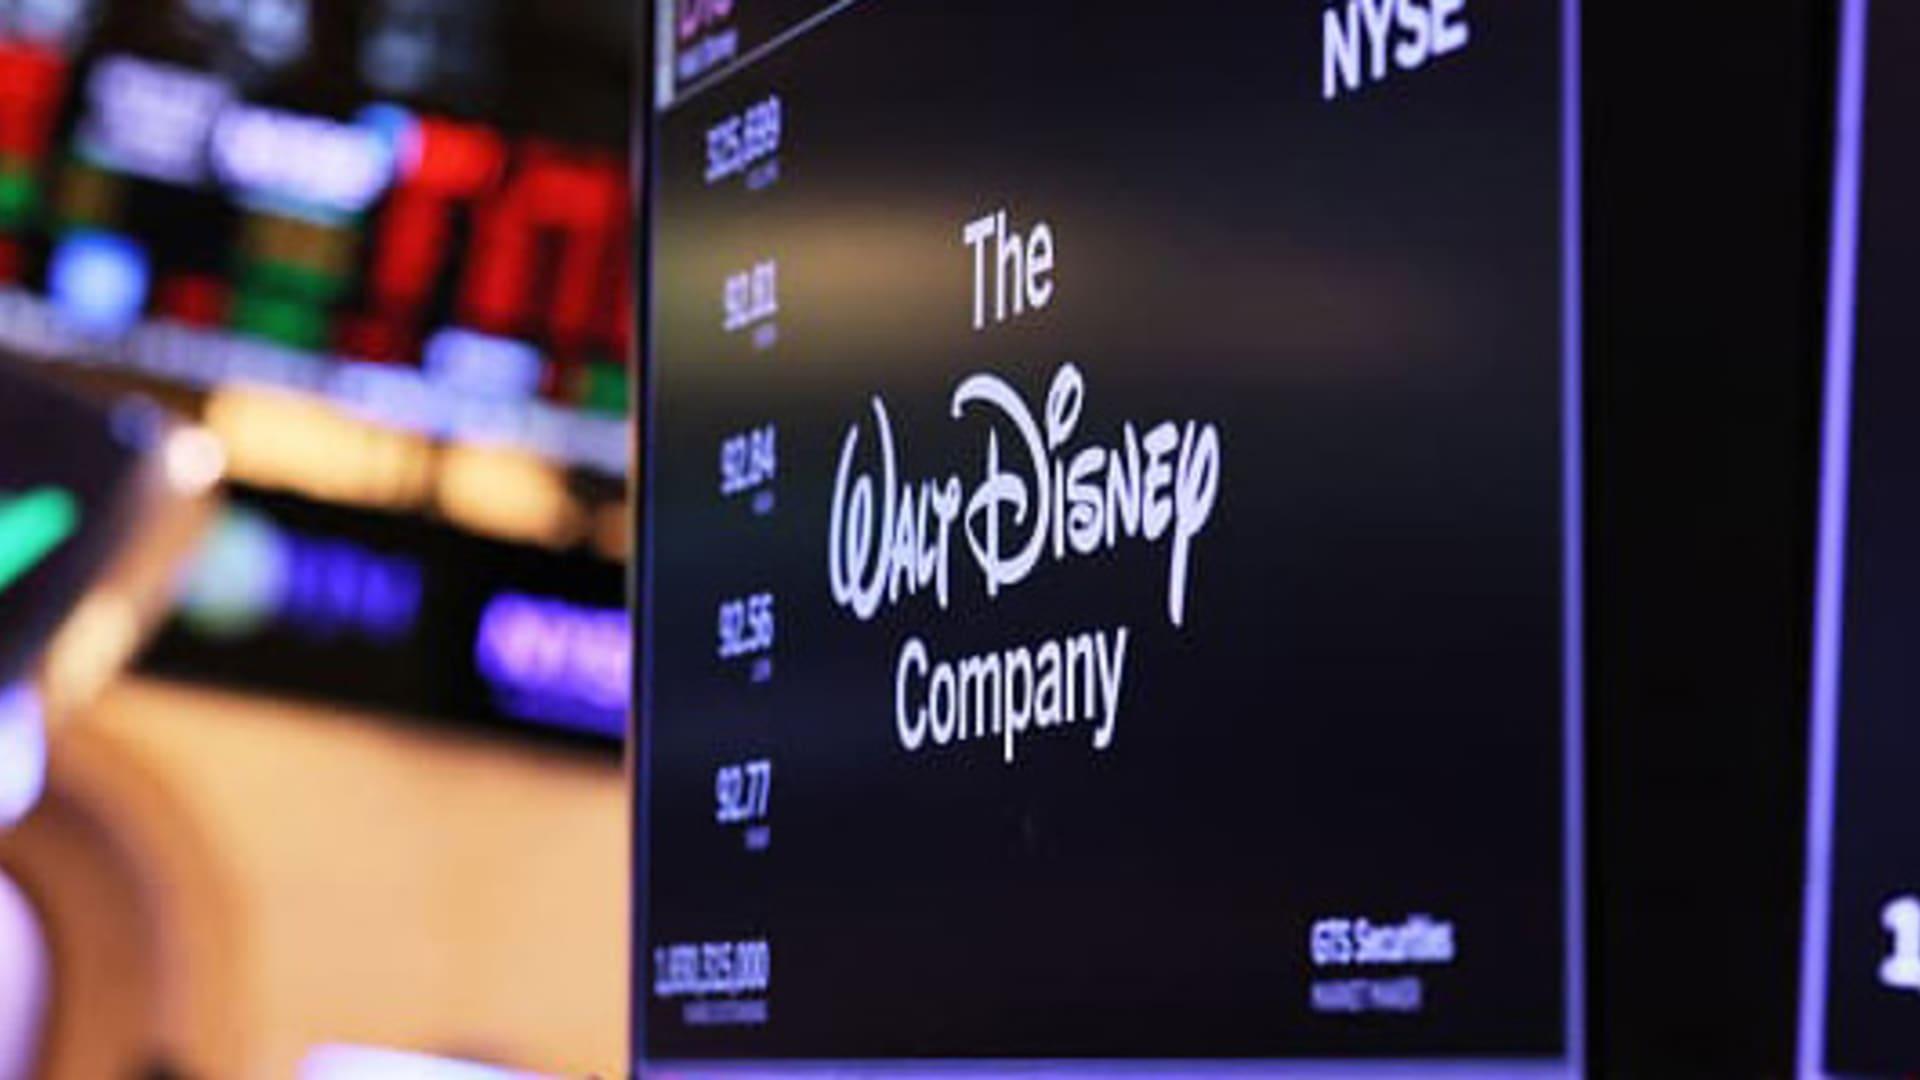 The Disney technology executive is leaving for personal reasons